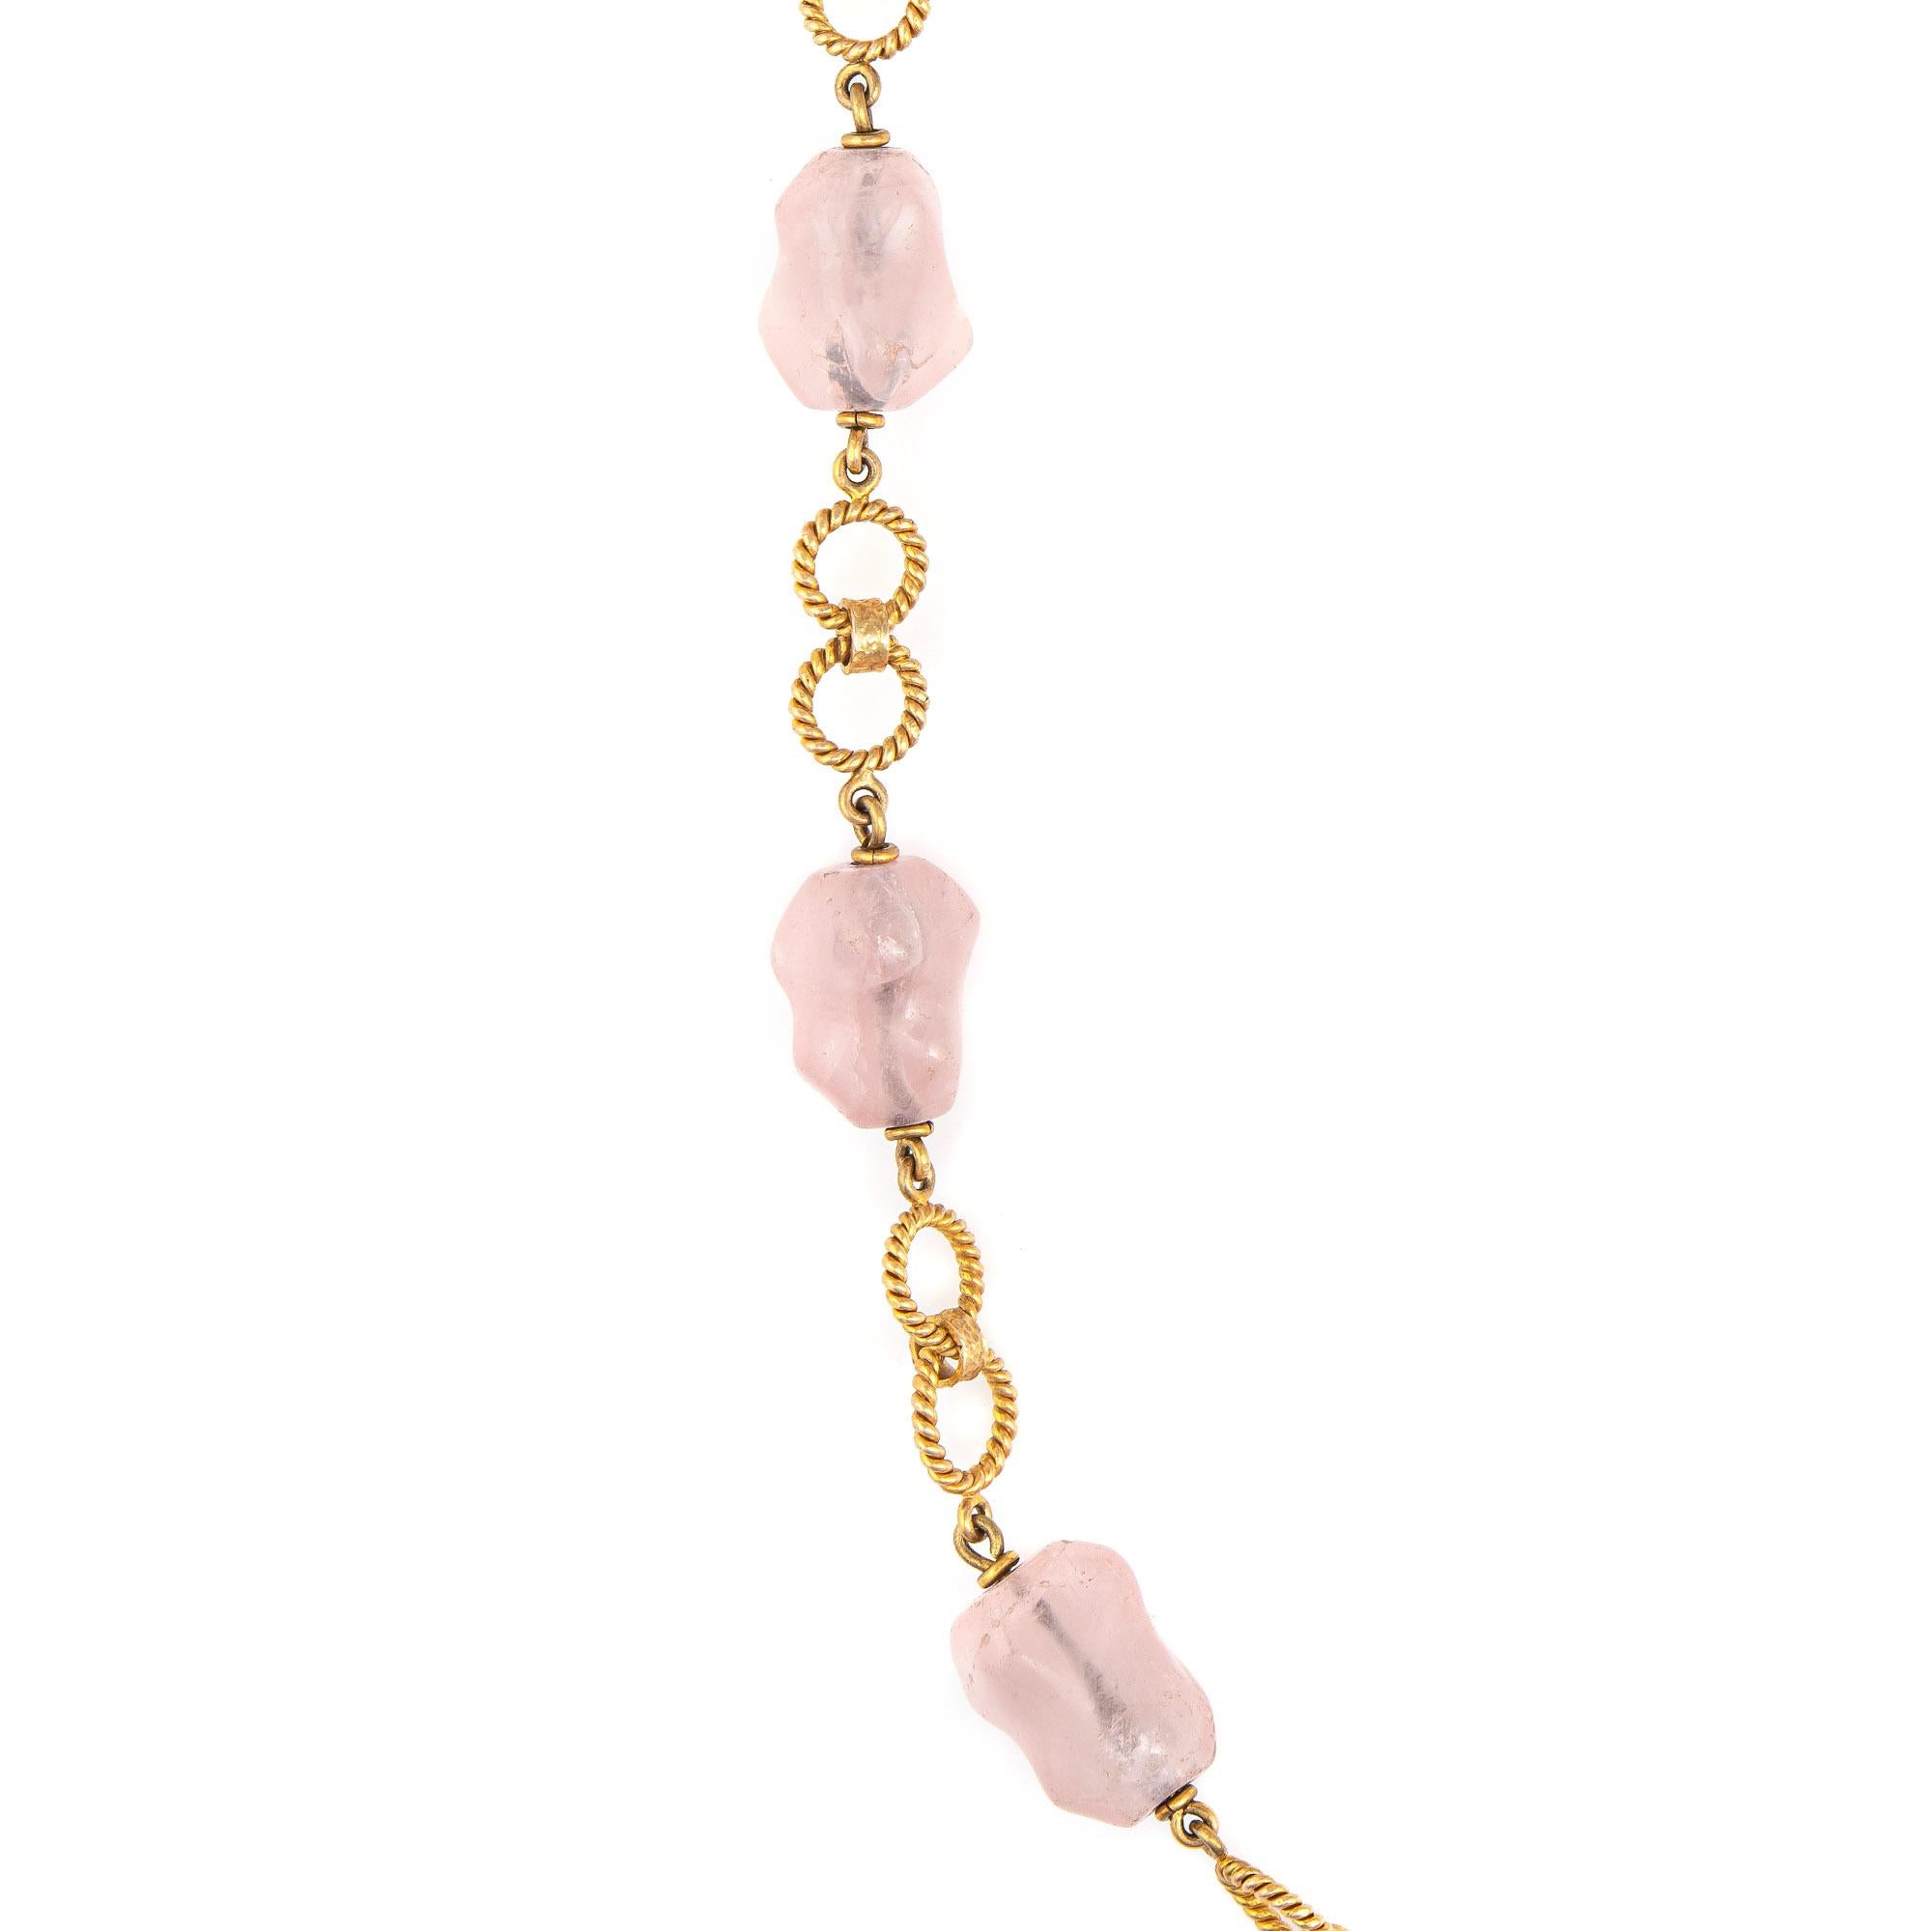 Finely detailed vintage rose quartz necklace crafted in 14 karat yellow gold (circa 1970s). 

Rose quartz beads measure (average) 3/4 x 1/2 inch (in very good condition and free of cracks or chips).

The stylish necklace features musky pink rose